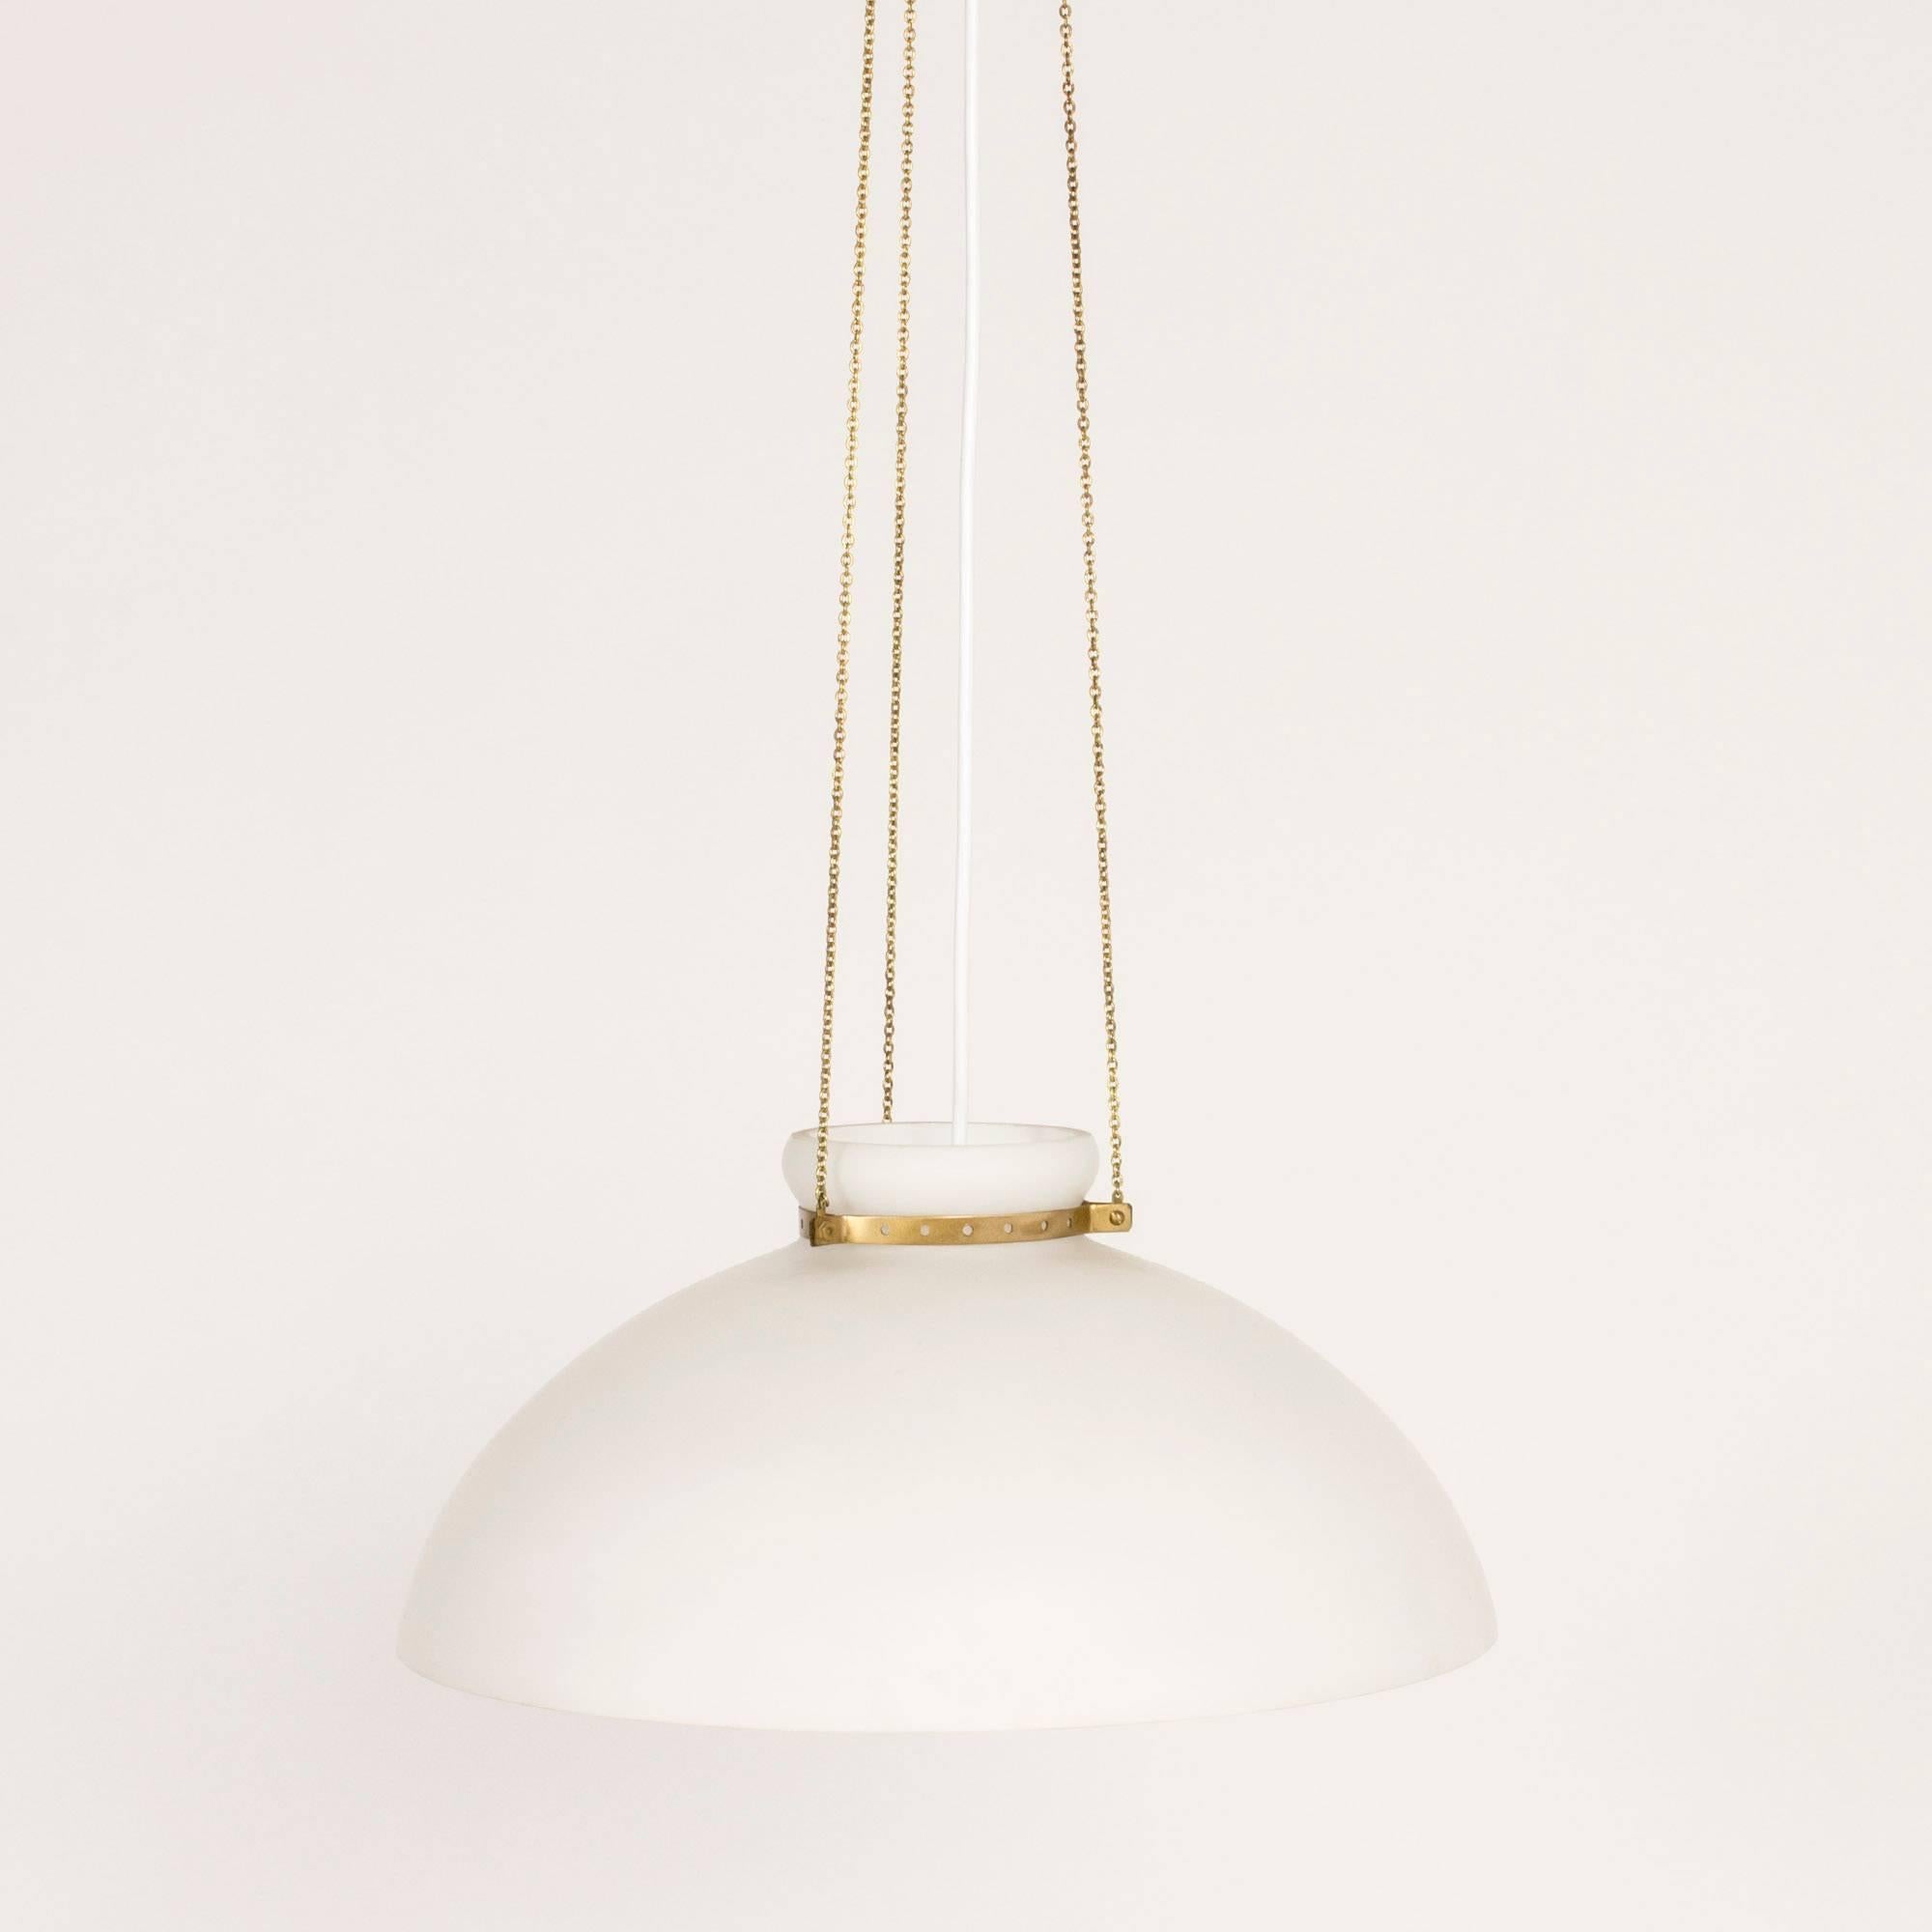 Simply elegant pendant lamp by Alf Svensson, made with an opaline glass shade suspended with slender brass chains. A slim brass strap with punched out holes encircles the neck of the lamp, holding the chains.